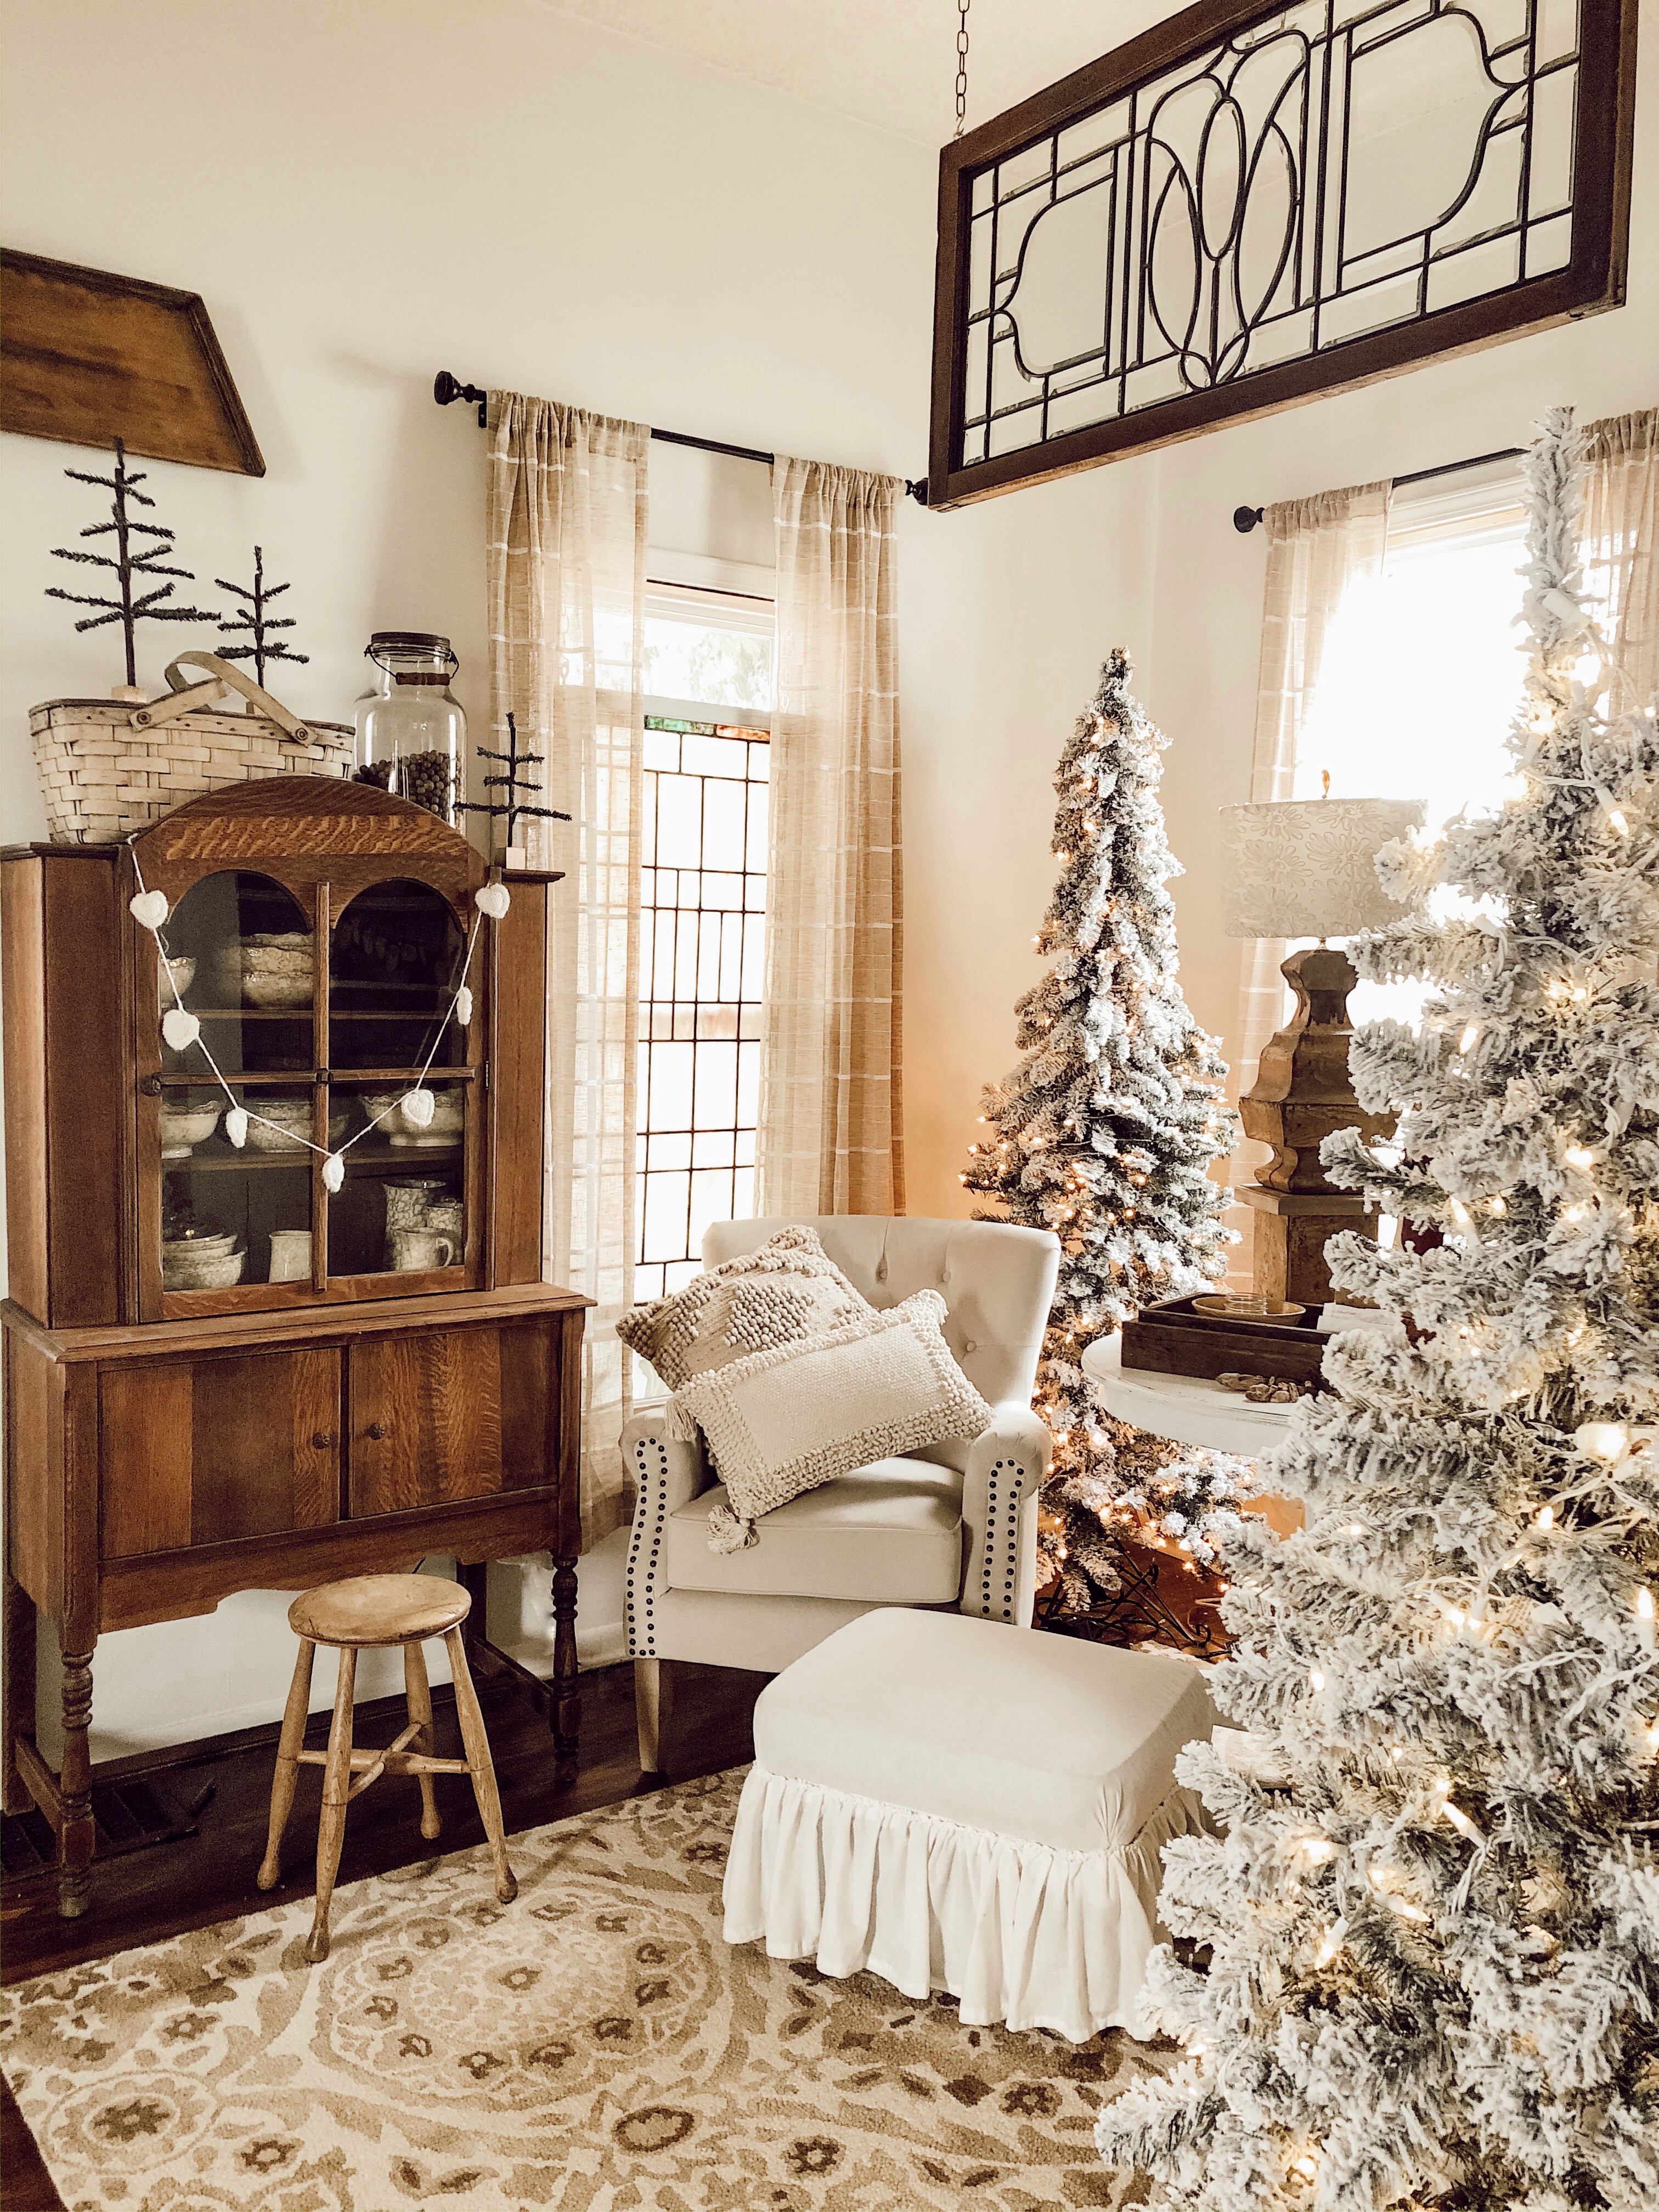 How to make a vintage looking Christmas tree